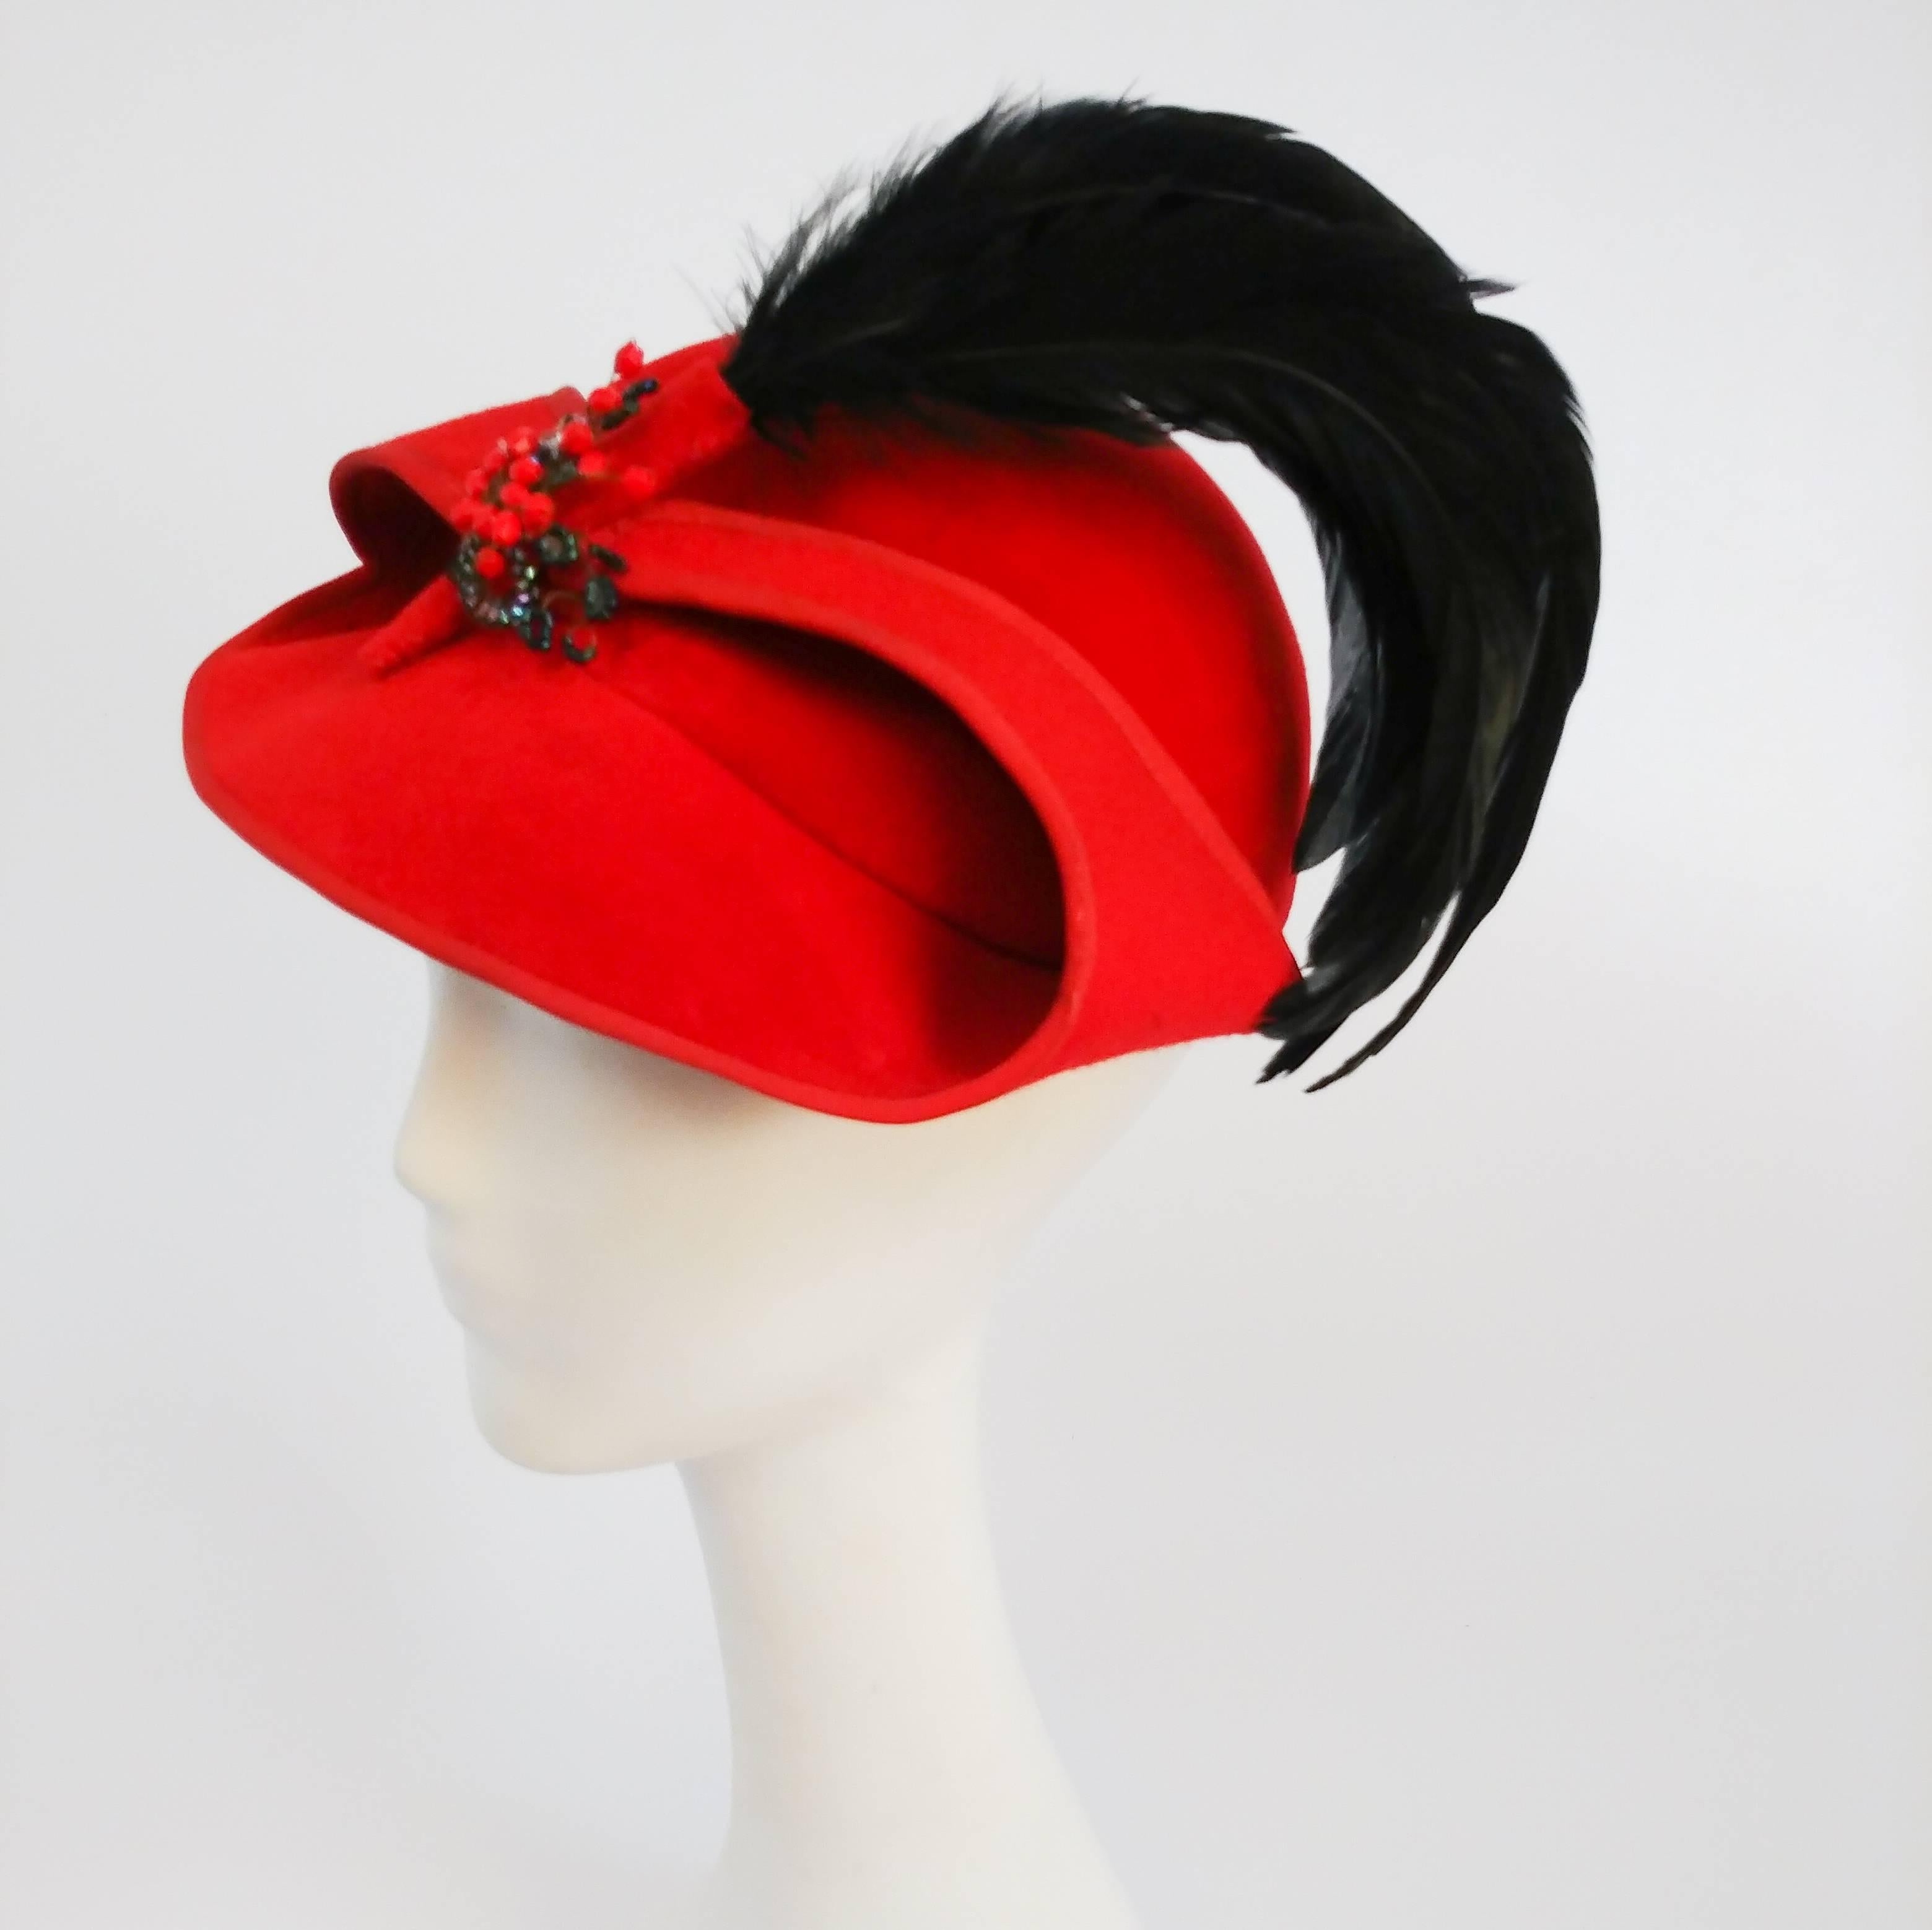 1930s Red Sculptural Velvet Hat w/ Black Feather. Sides of hat flip for visual interest and pinned in place with flower brooch and curled raven feathers. 